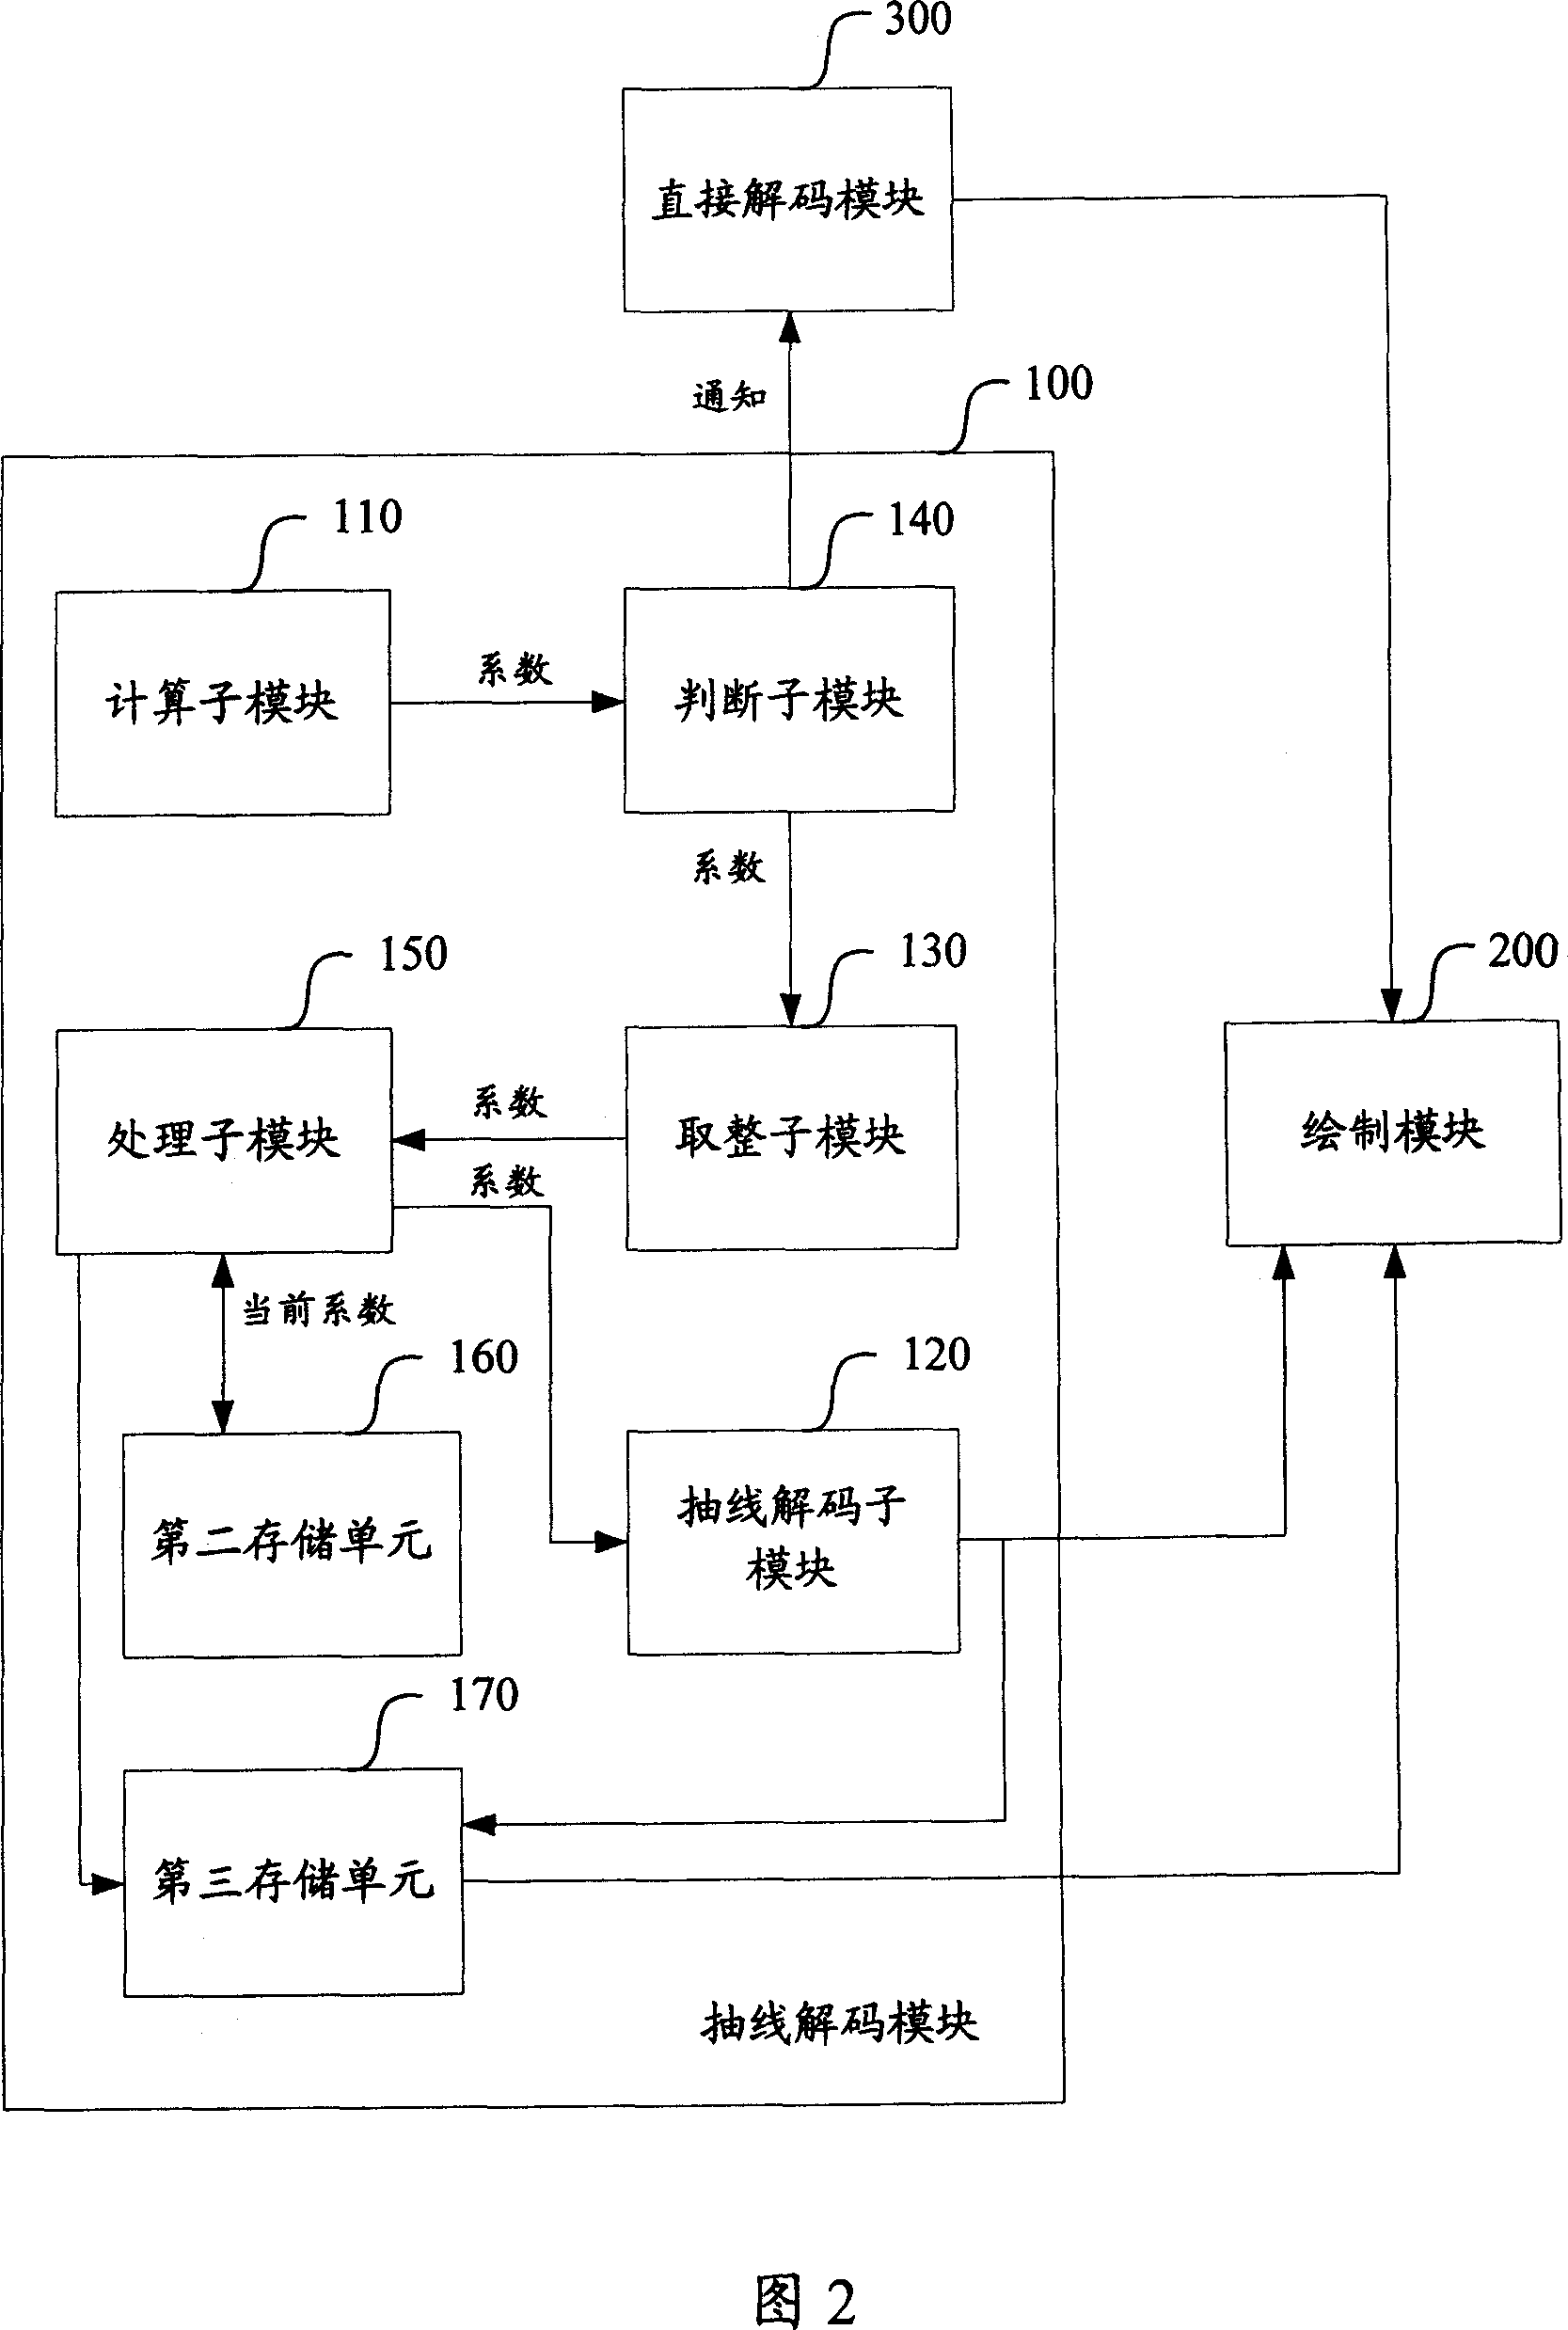 Image decoding display method and system